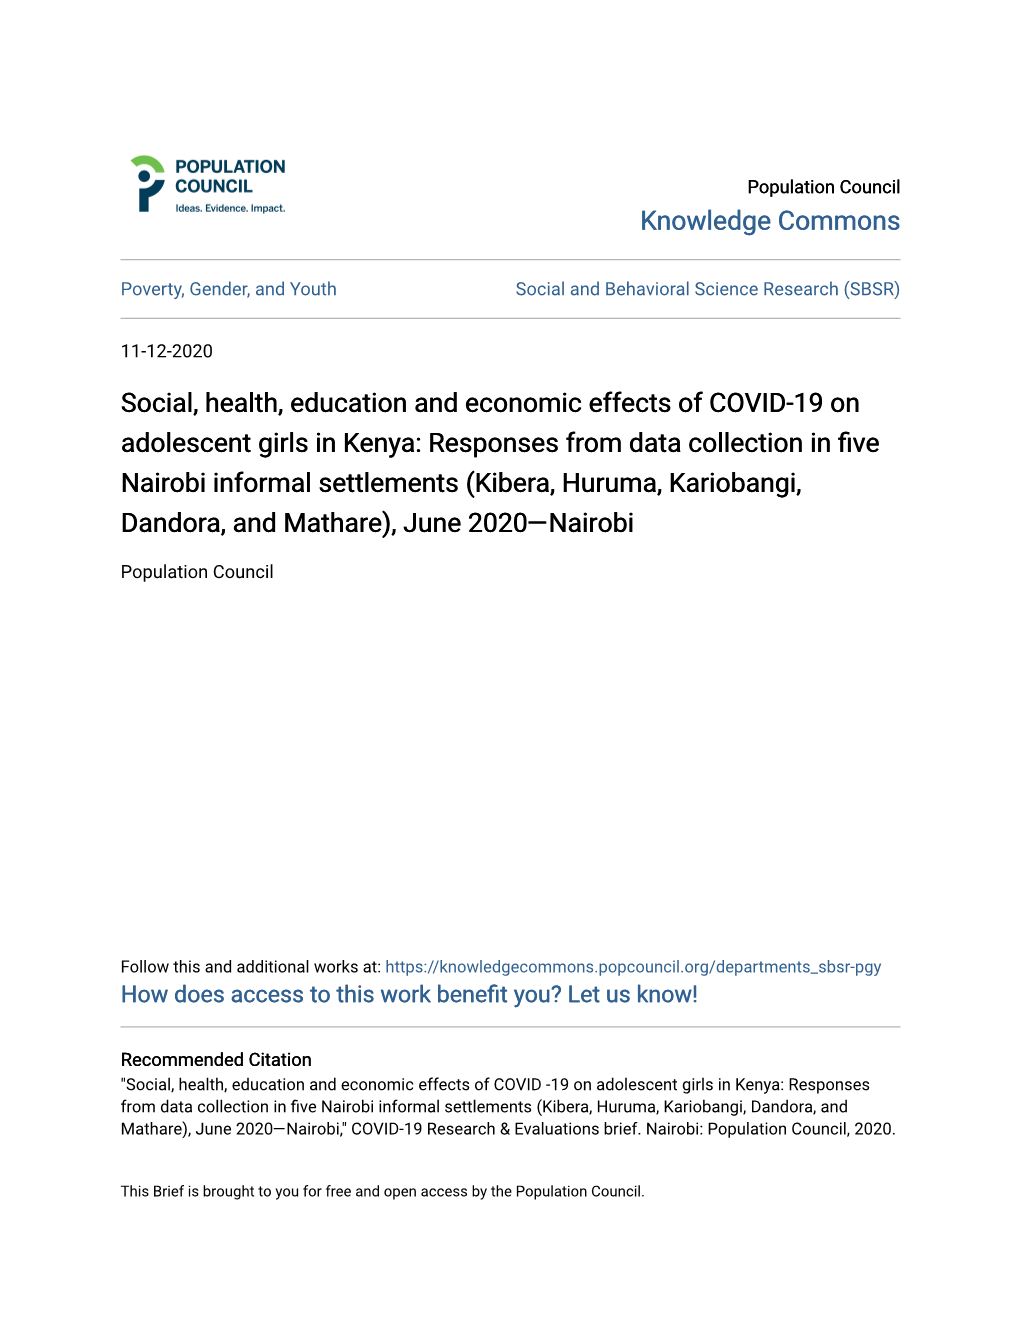 Social, Health, Education and Economic Effects of COVID-19 On